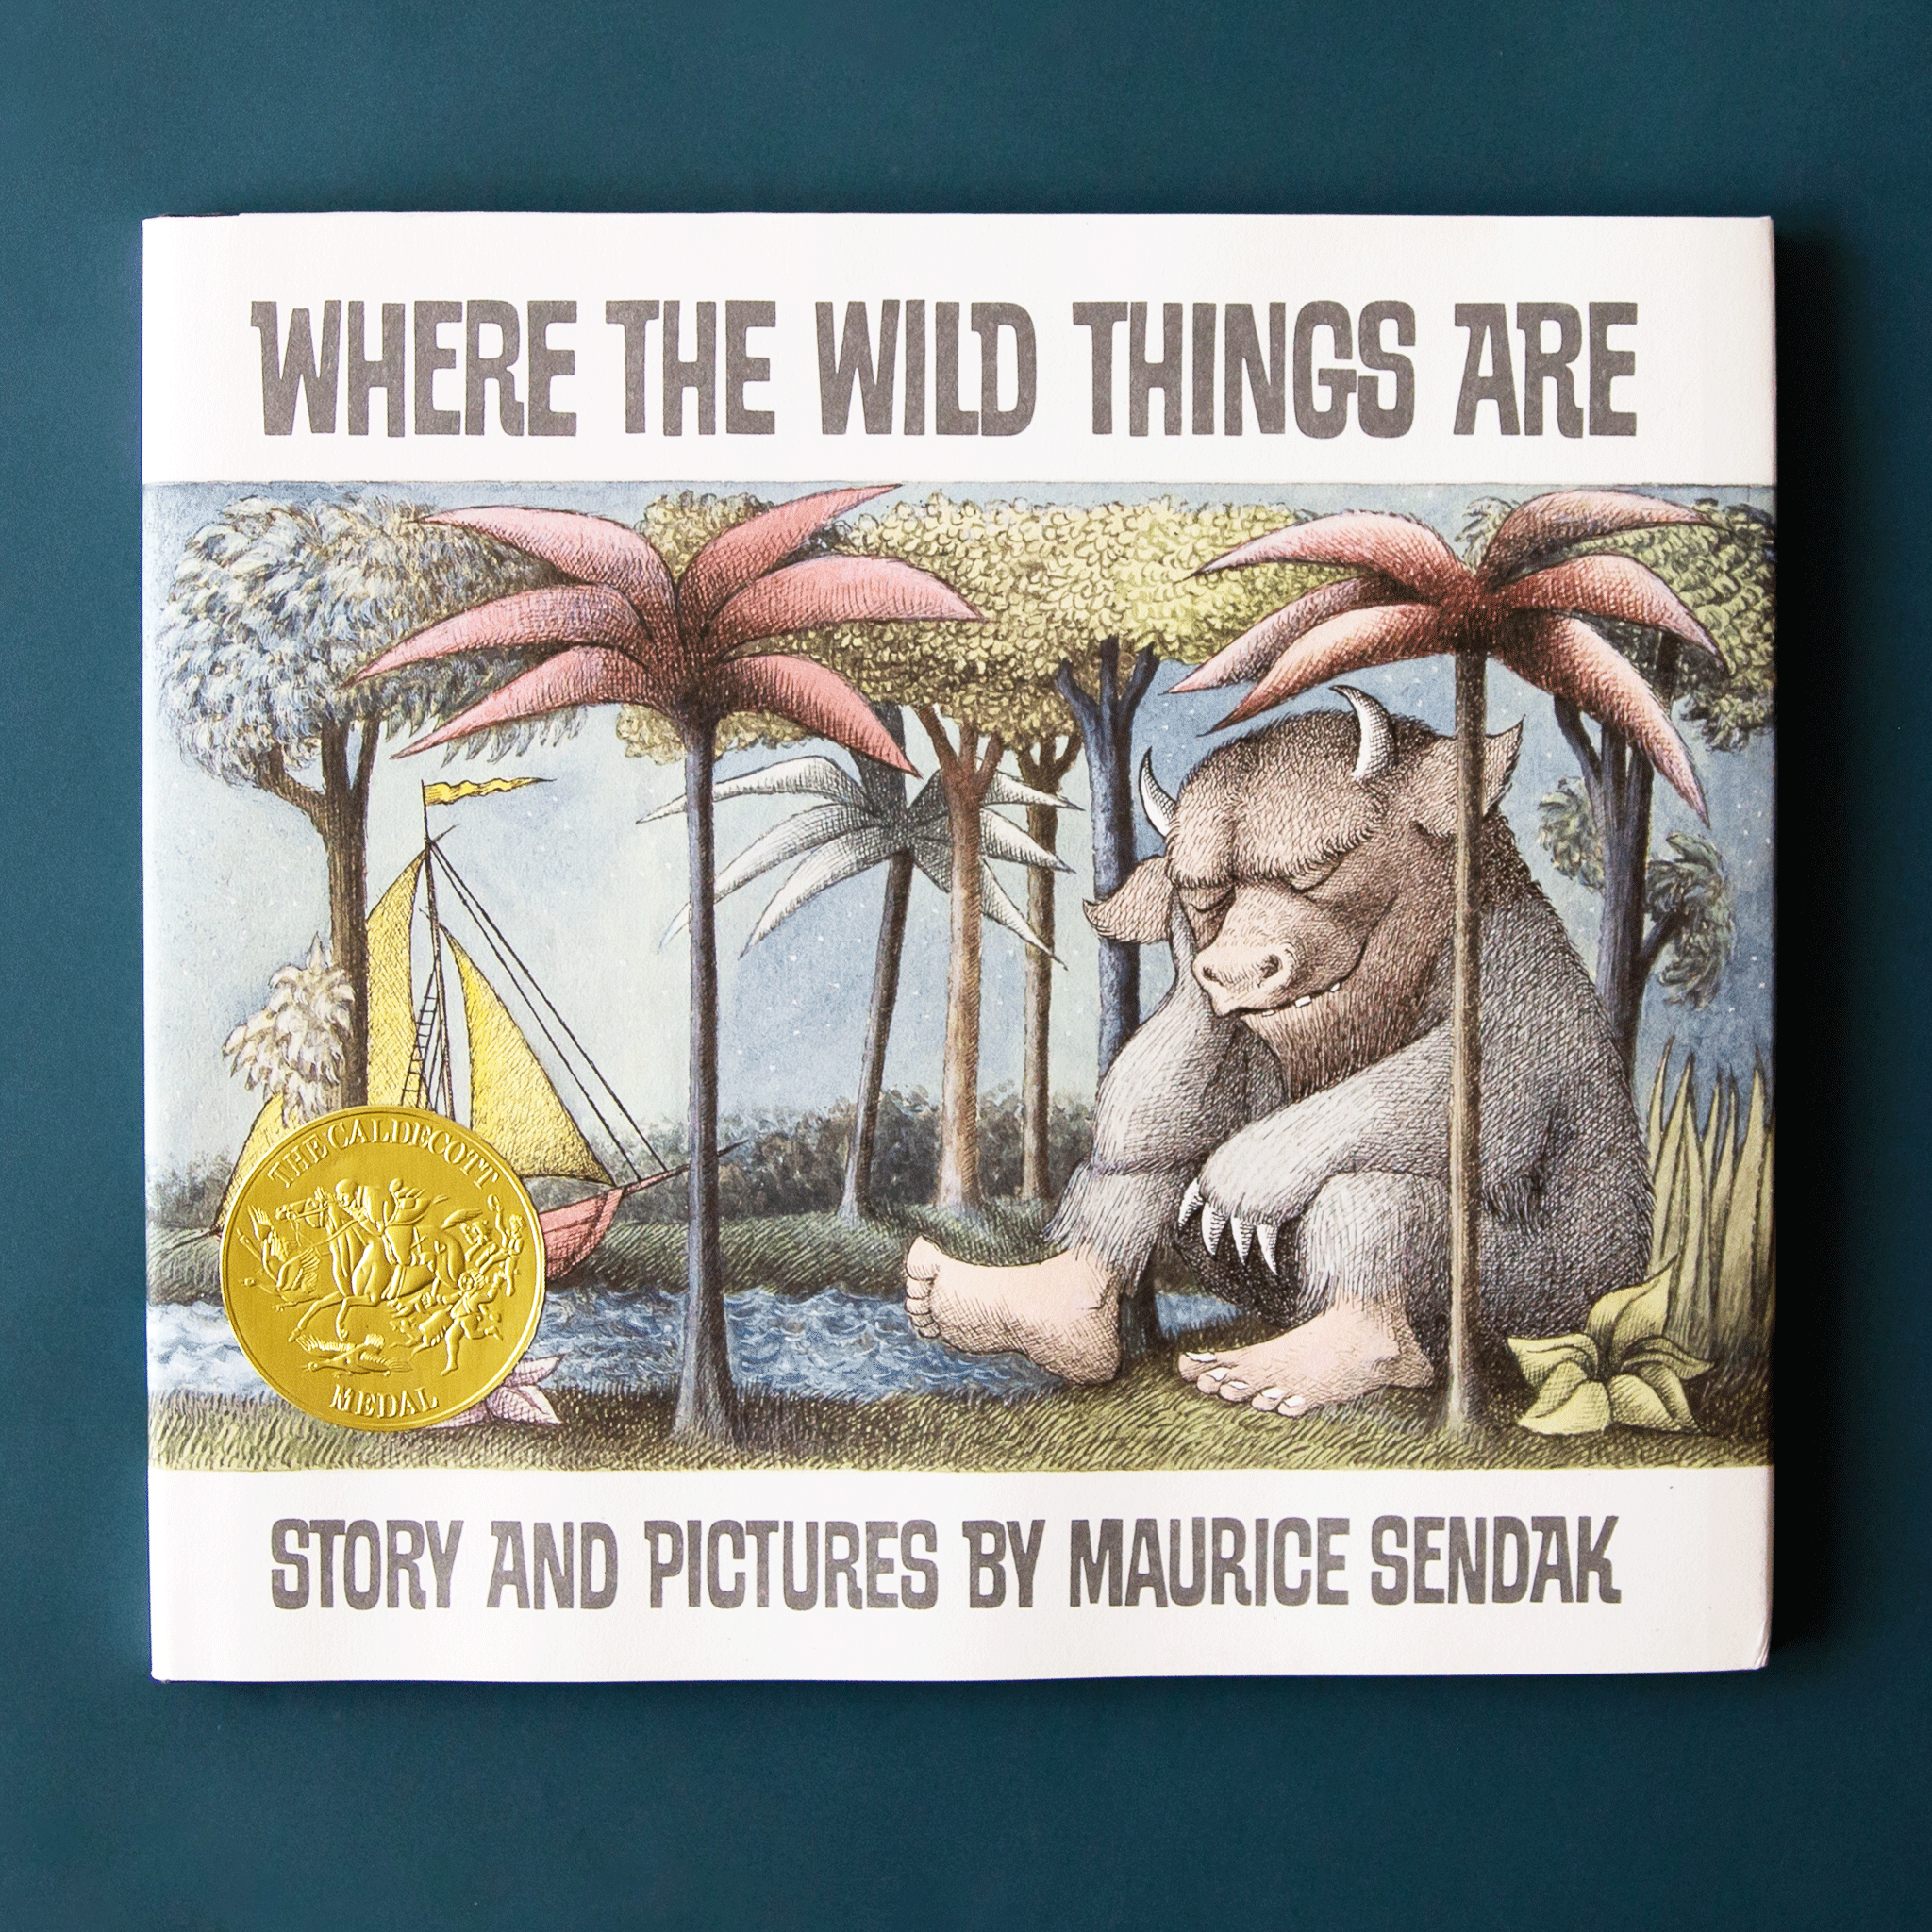 This classic children&#39;s story book features a dreamy forest homing a large mystic creature with pale blue fur, sharpened claws and round horns. The creature sits peacefully among the trees and across from a pond filled with a soft yellow and red sail boat. The book is titled &#39;Where the Wild Things Are&#39; in pale teal capital lettering above.